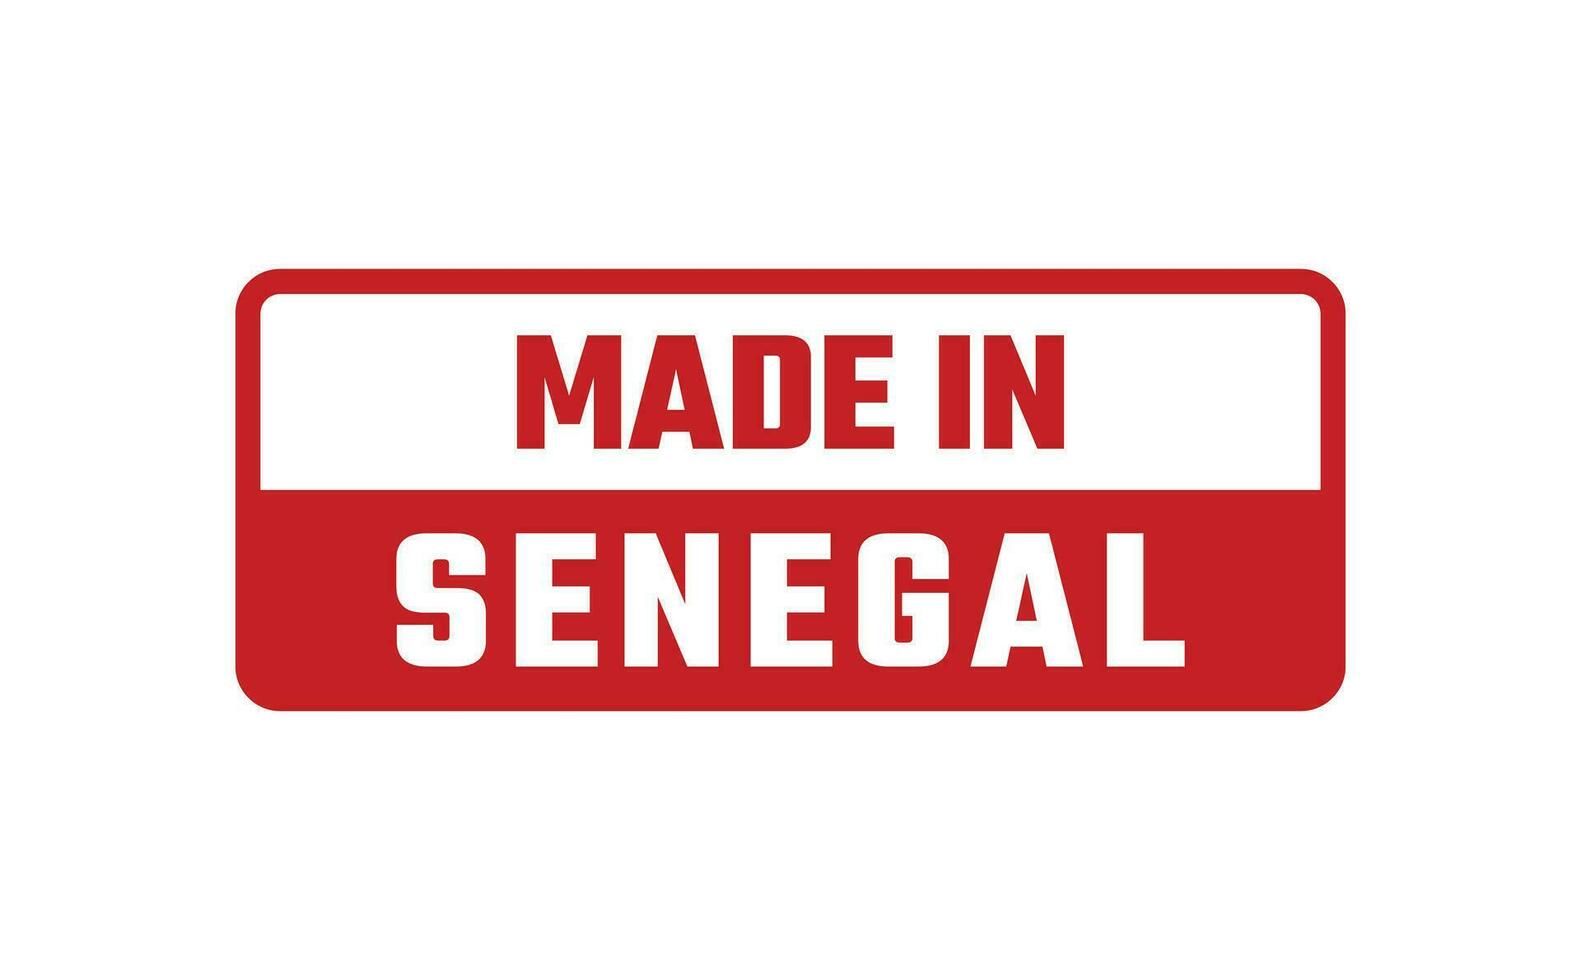 Made In Senegal Rubber Stamp vector